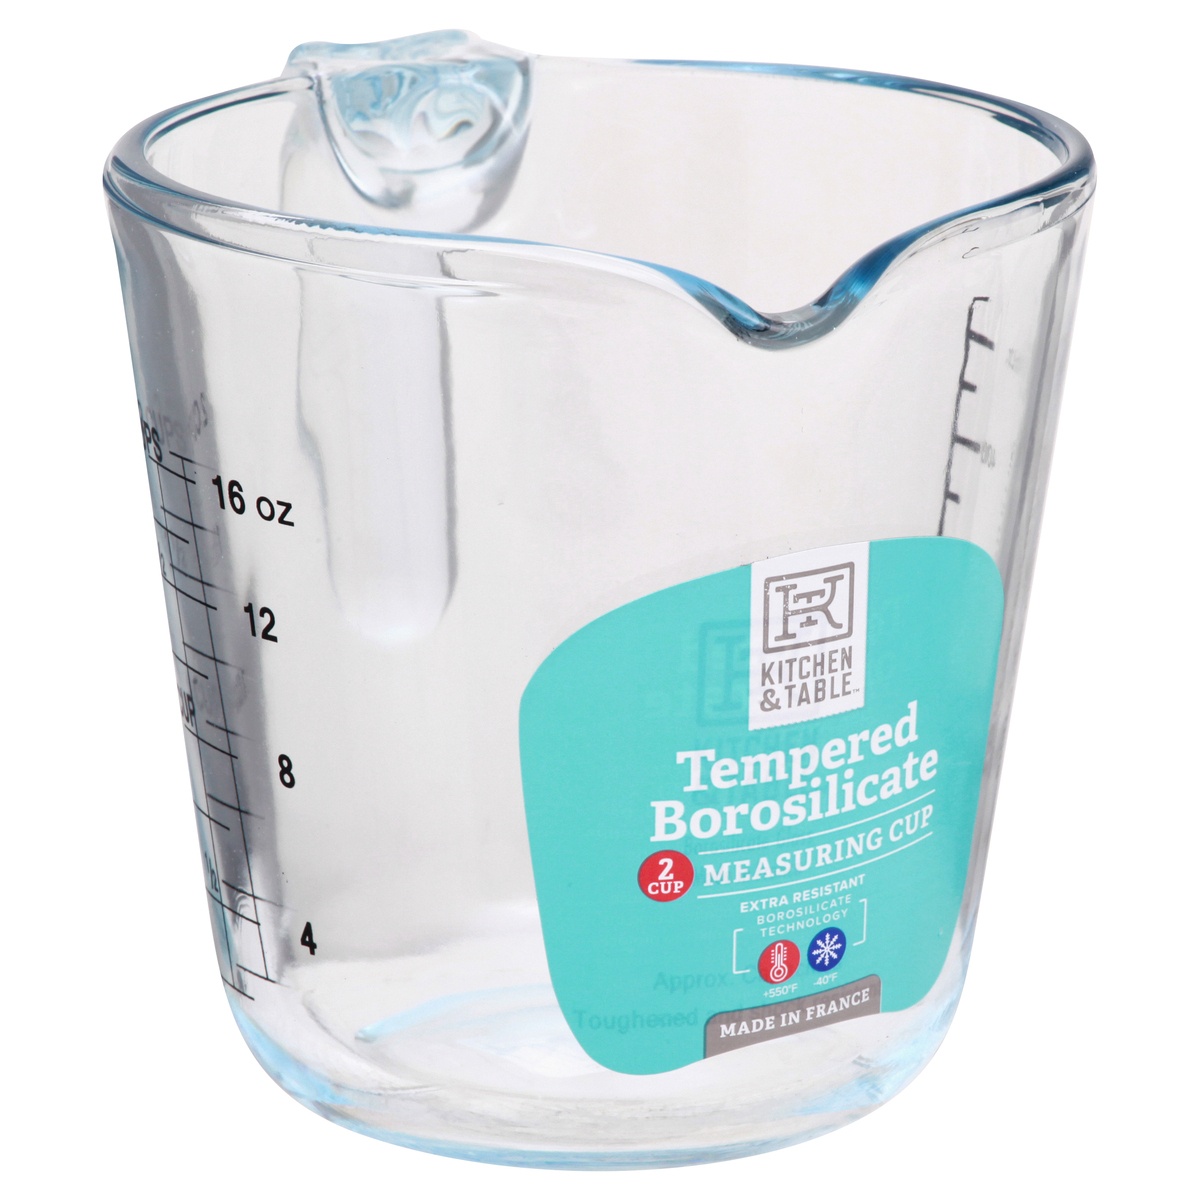 HIC 1-cup Glass Measuring Cup - Abundant Kitchen